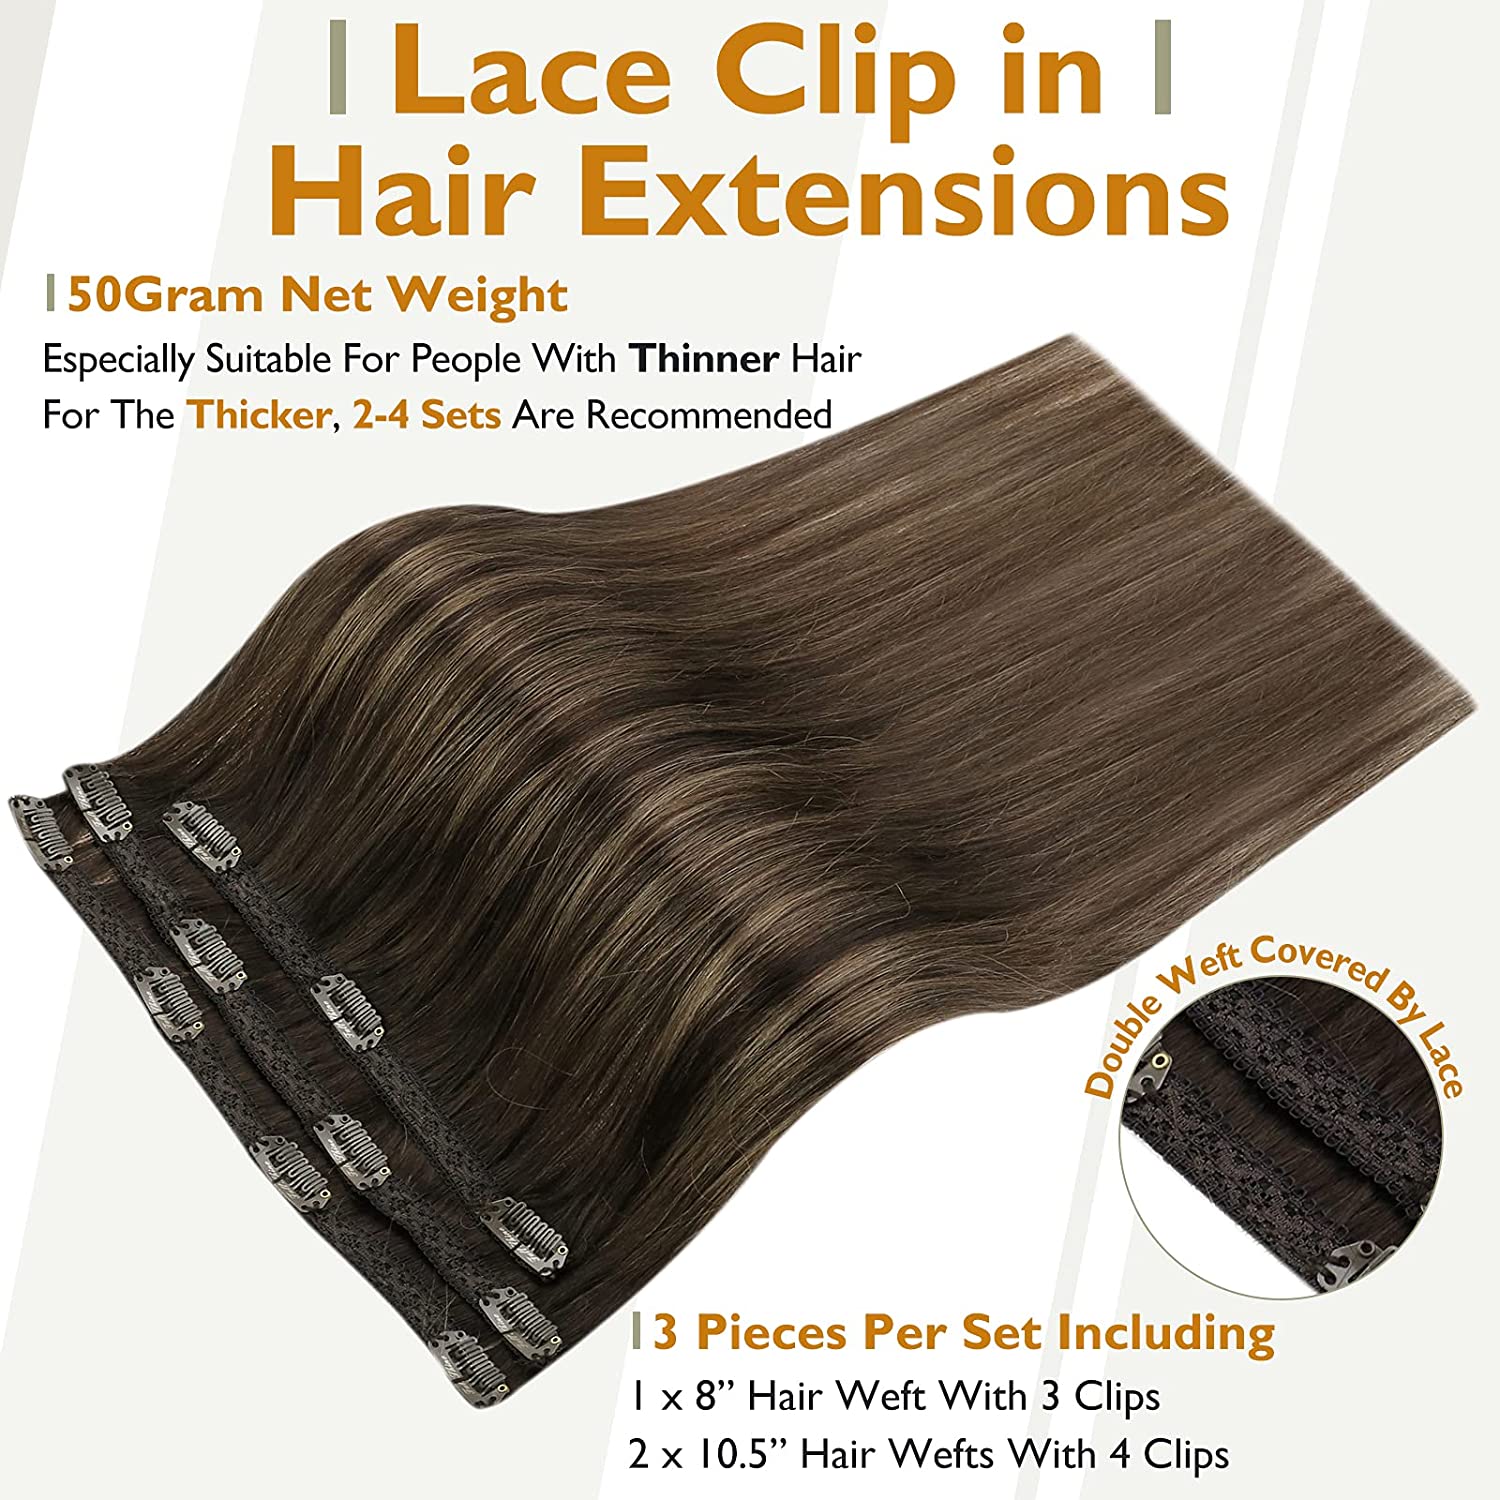 FShine Lace Clip In Hair Extensions Clip in Hair Extensions #2 - FShine Shop